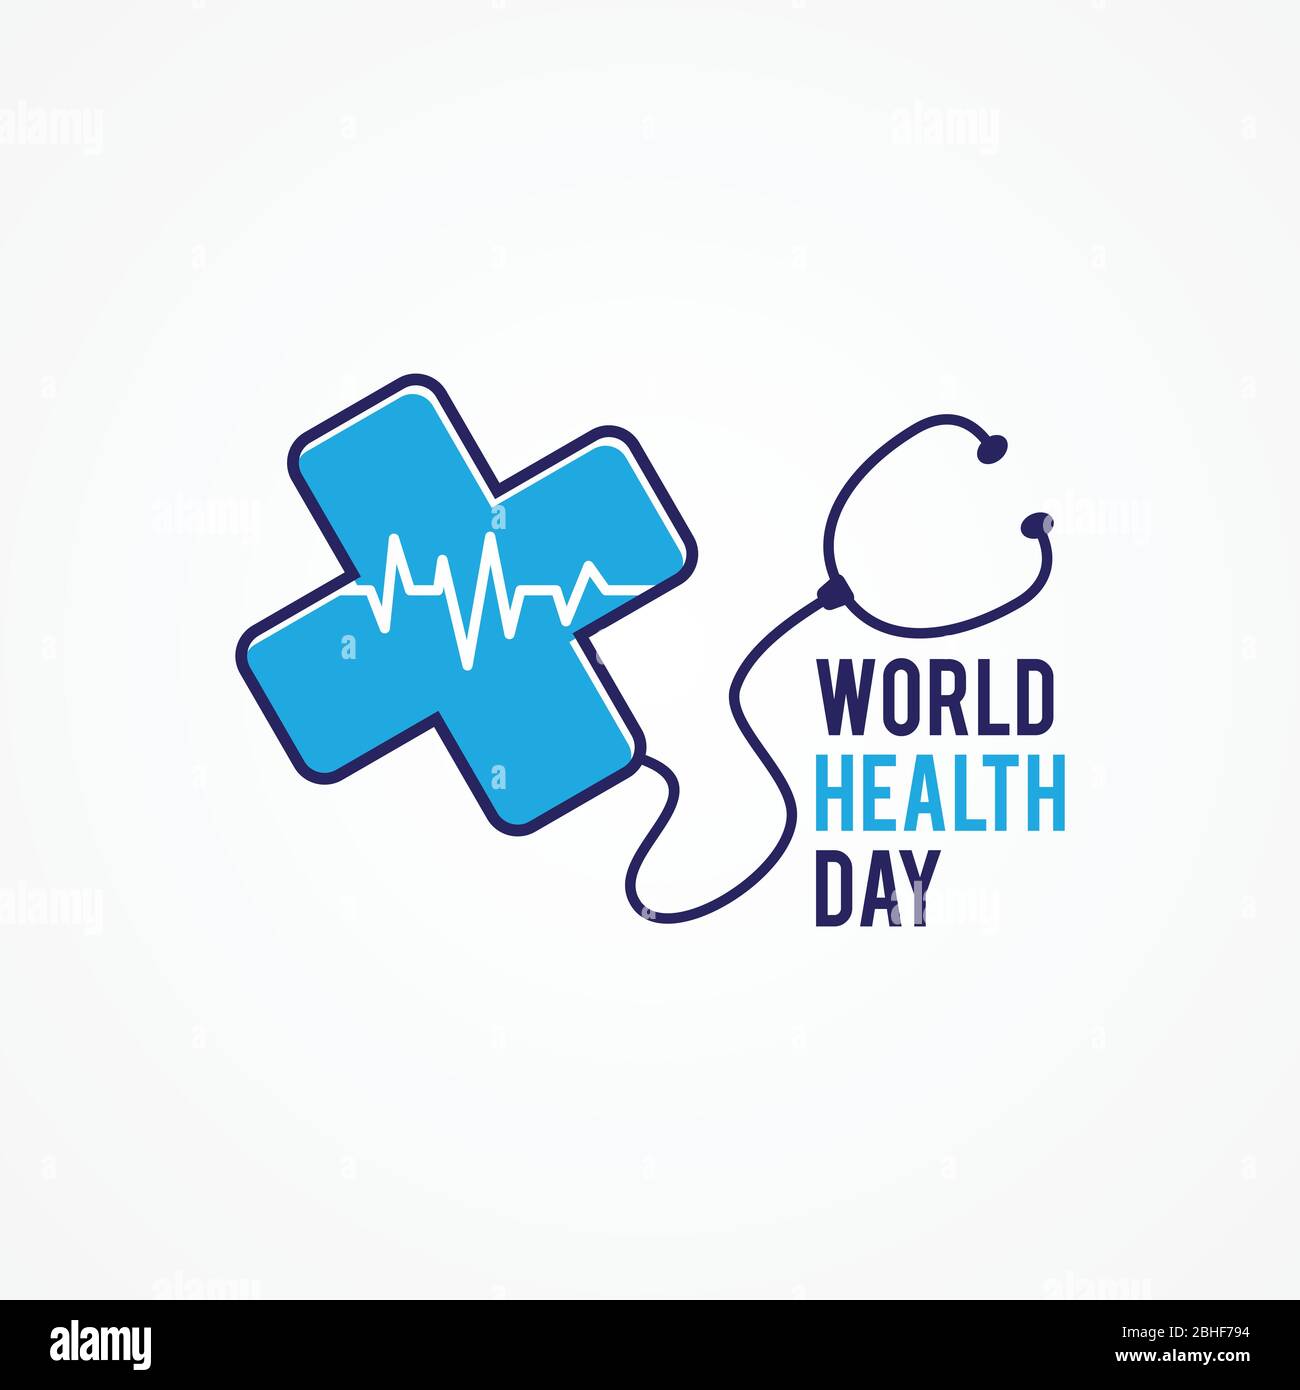 World health day with symbol cross health and stethoscope on the white background. Illustration of world health day, international event. Stock Vector